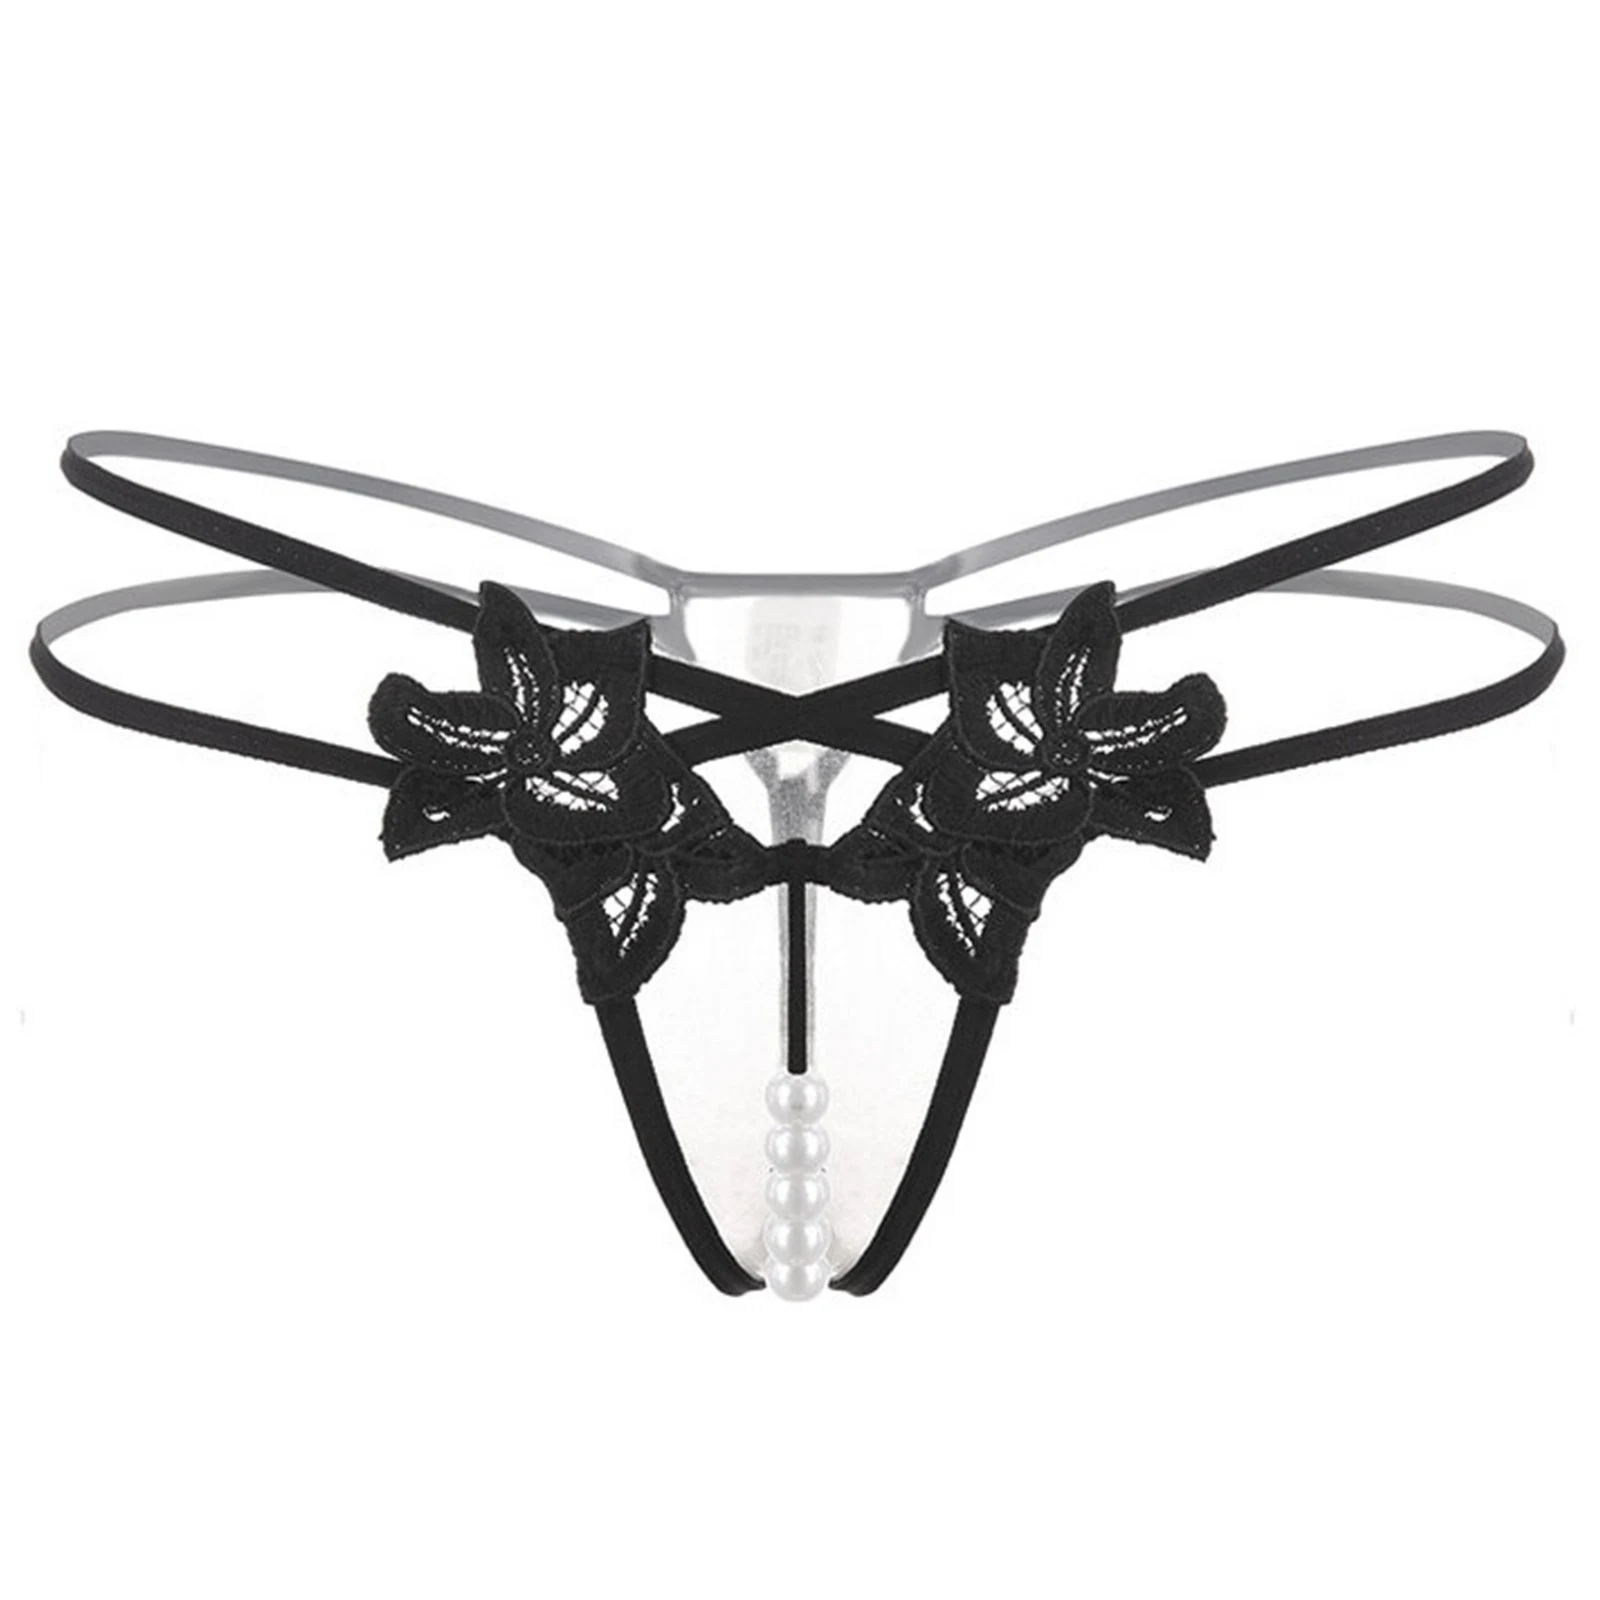 Men Double Elastic Waistband Pearls Crotchless Thongs Underpants Stretchy Embroidered G-string Briefs Low Waist T-back Underwear boxer underwear